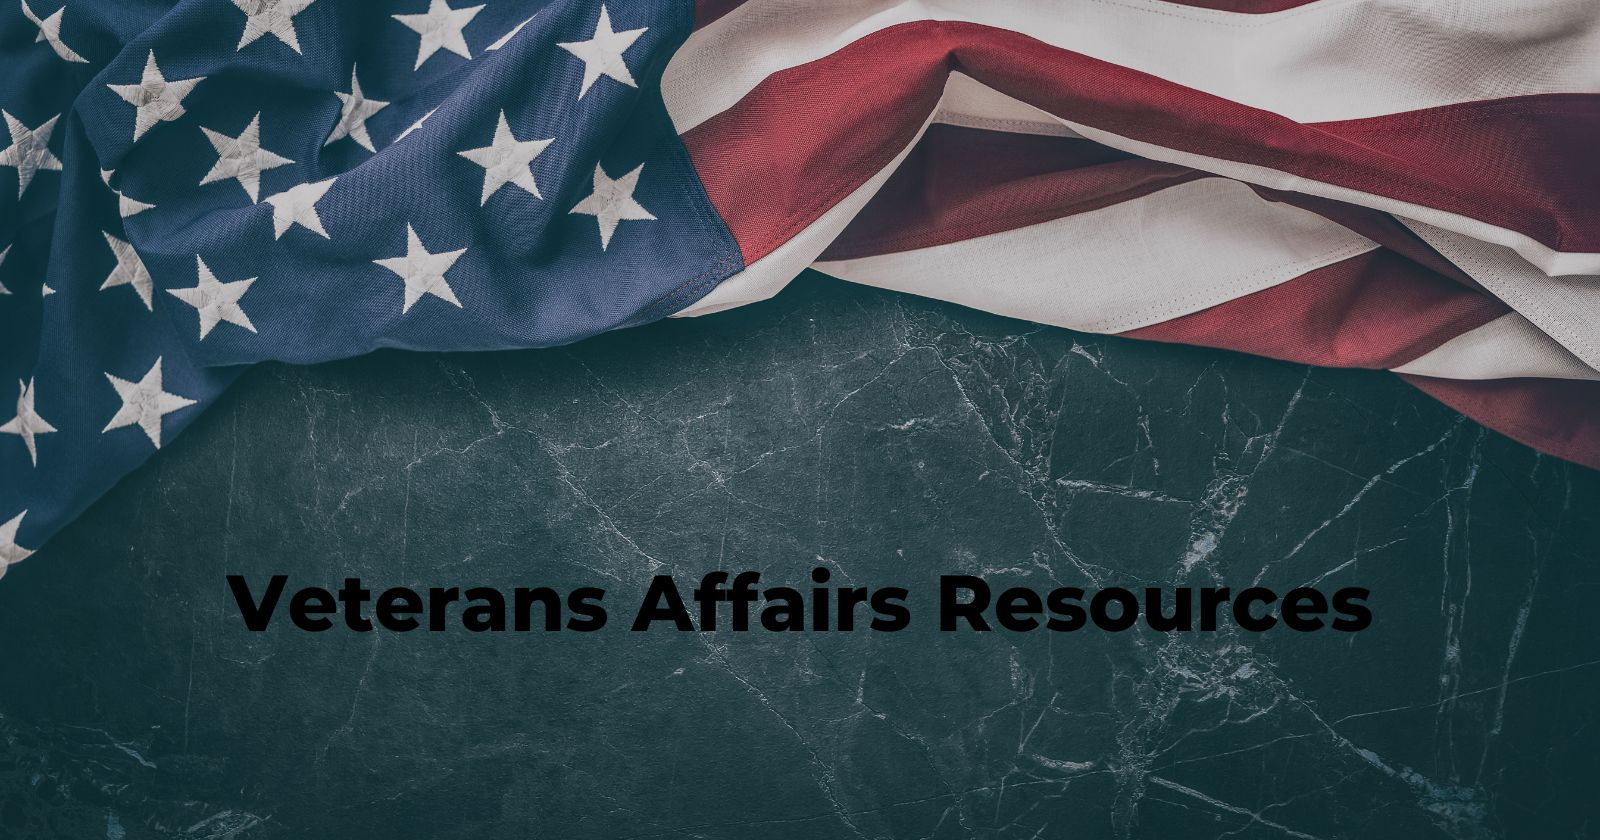 Resources for PTSD Recovery
US Flag